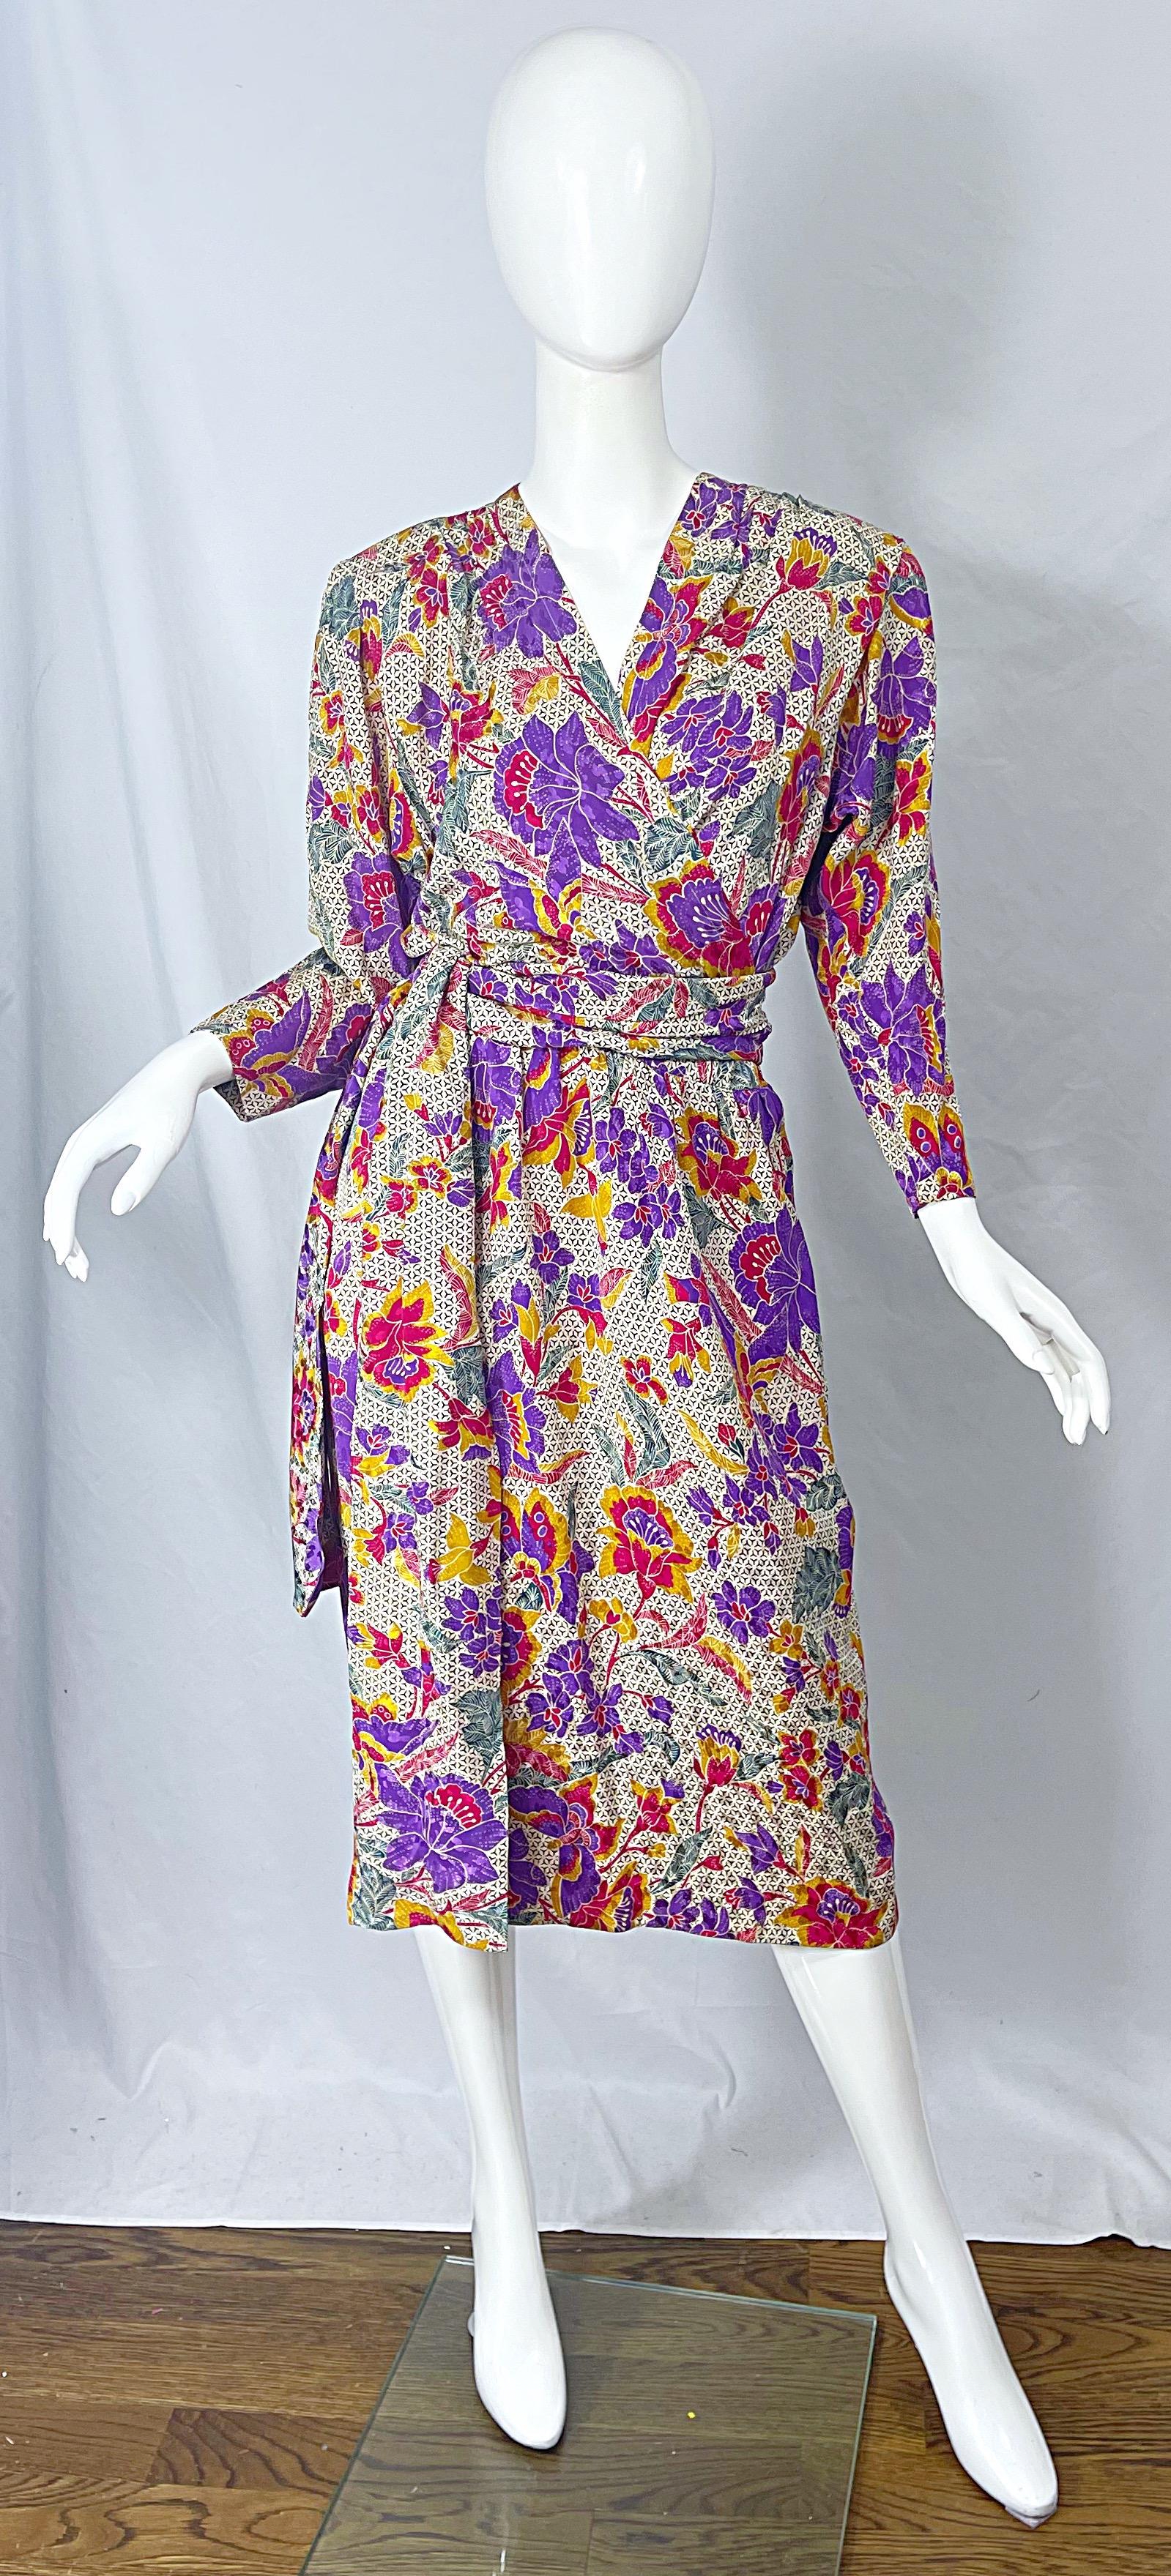 Chic vintage 80s YVES SAINT LAURENT Rive Gauche flower and logo print silk wrap dress ! Features a floral print with vivid colors of purple, marigold, pink, green throughout. Ivory backdrop with the black Y logo printed all over. Pockets at each